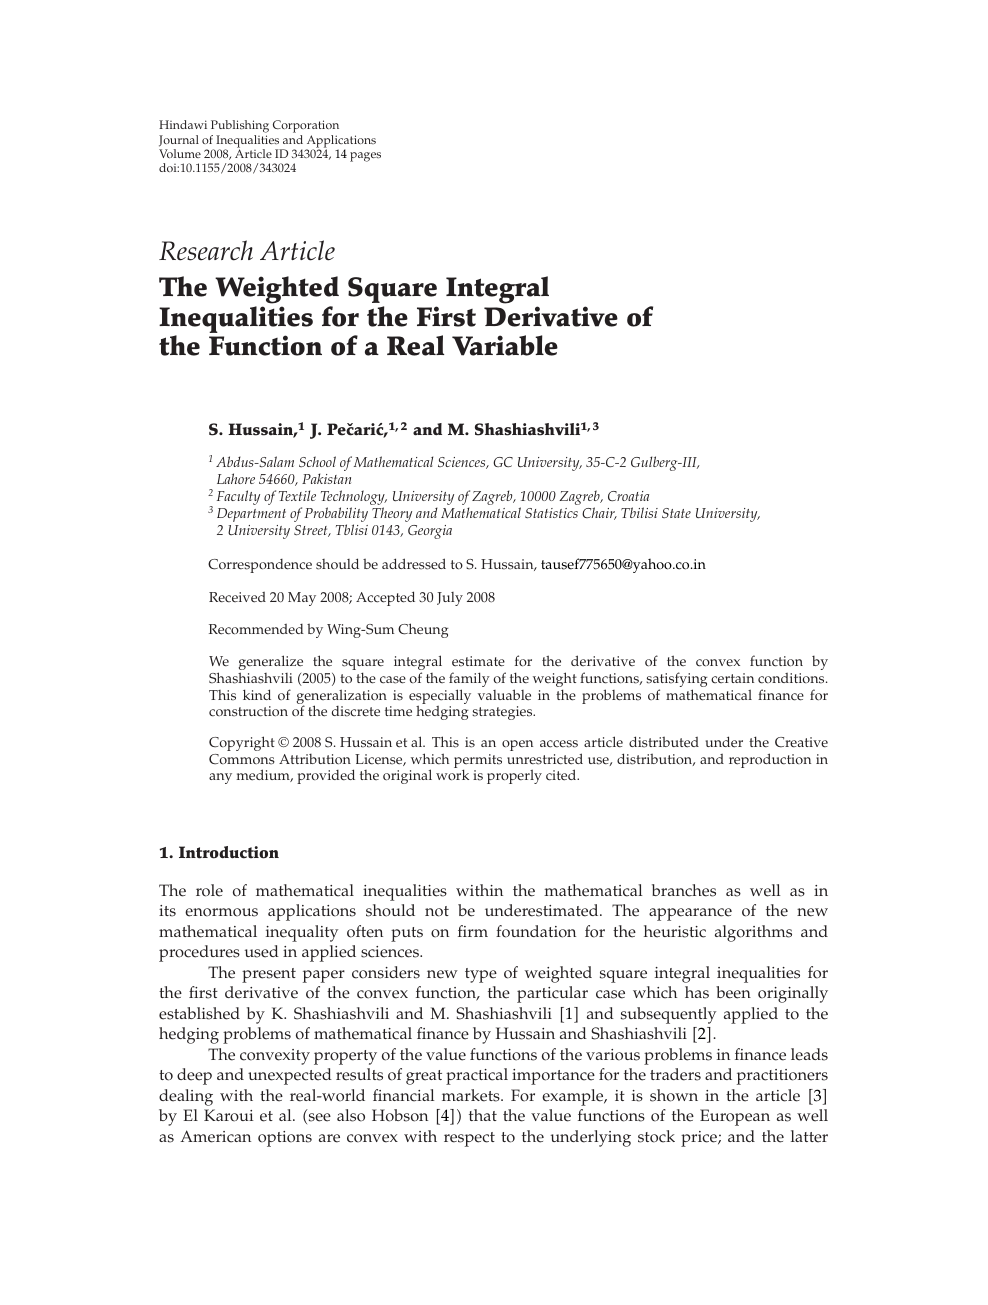 The Weighted Square Integral Inequalities For The First Derivative Of The Function Of A Real Variable Topic Of Research Paper In Mathematics Download Scholarly Article Pdf And Read For Free On